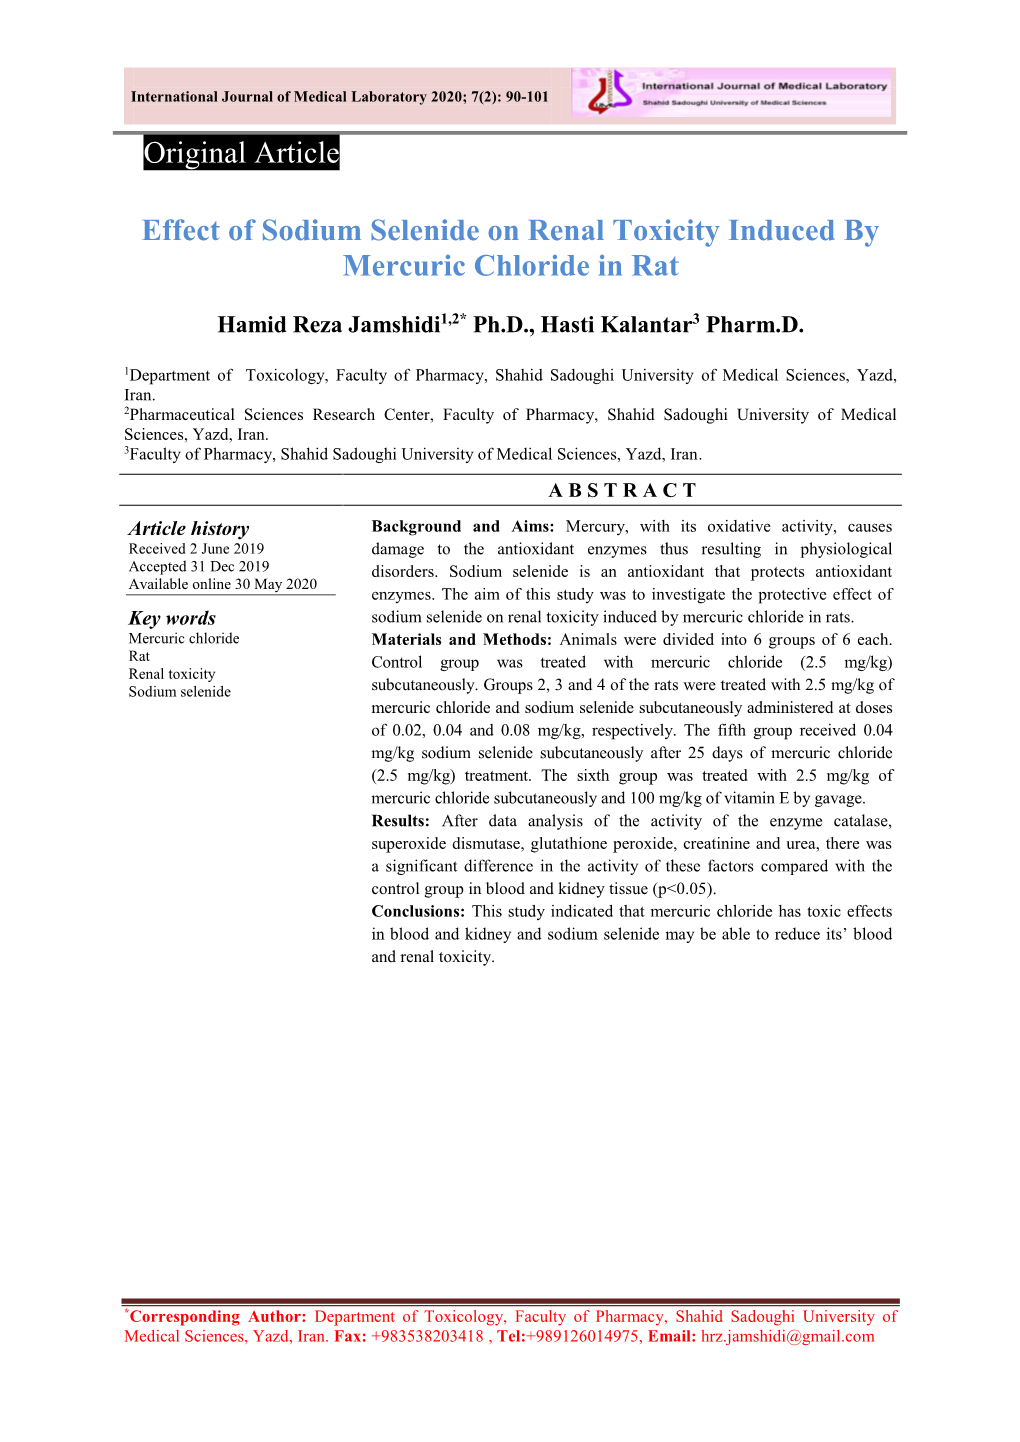 Original Article Effect of Sodium Selenide on Renal Toxicity Induced by Mercuric Chloride In